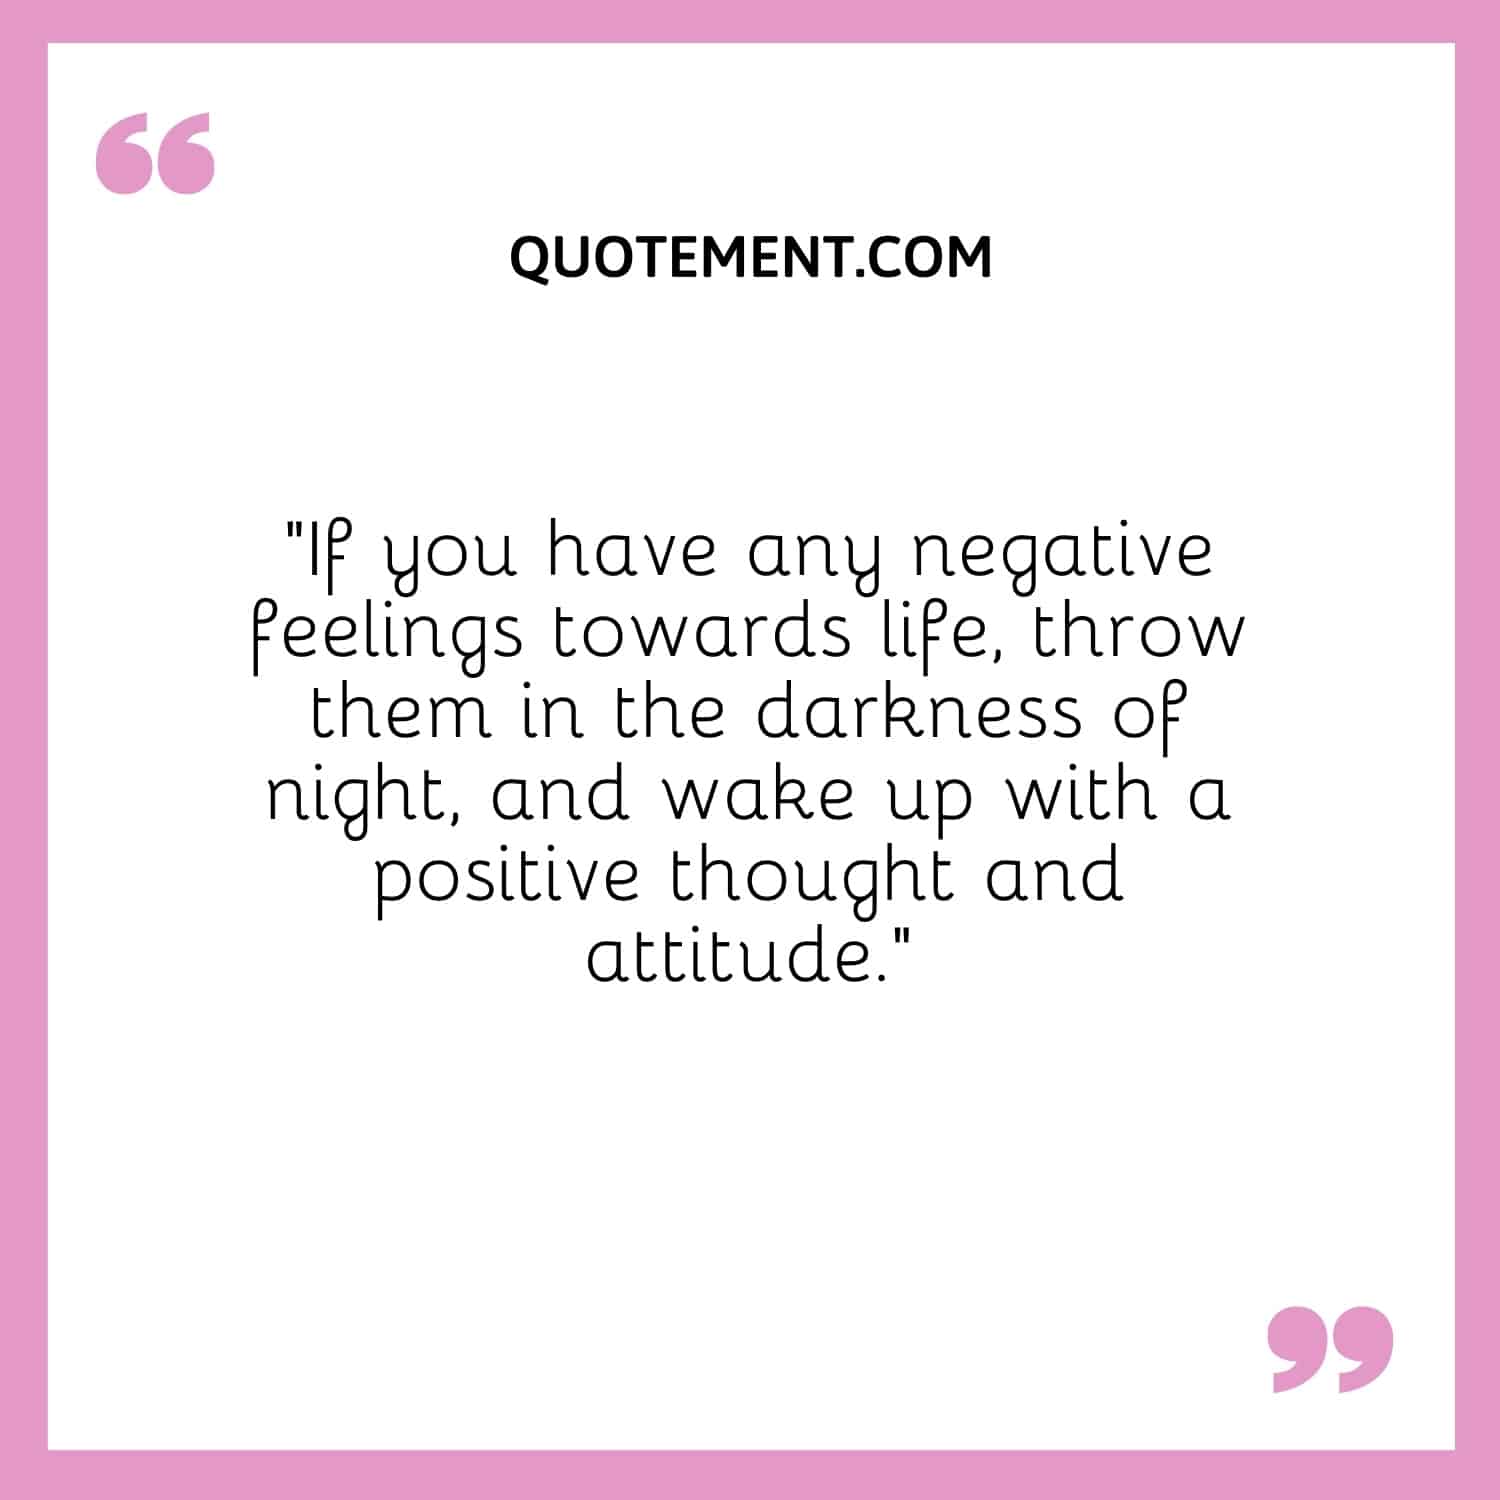 wake up with a positive thought and attitude